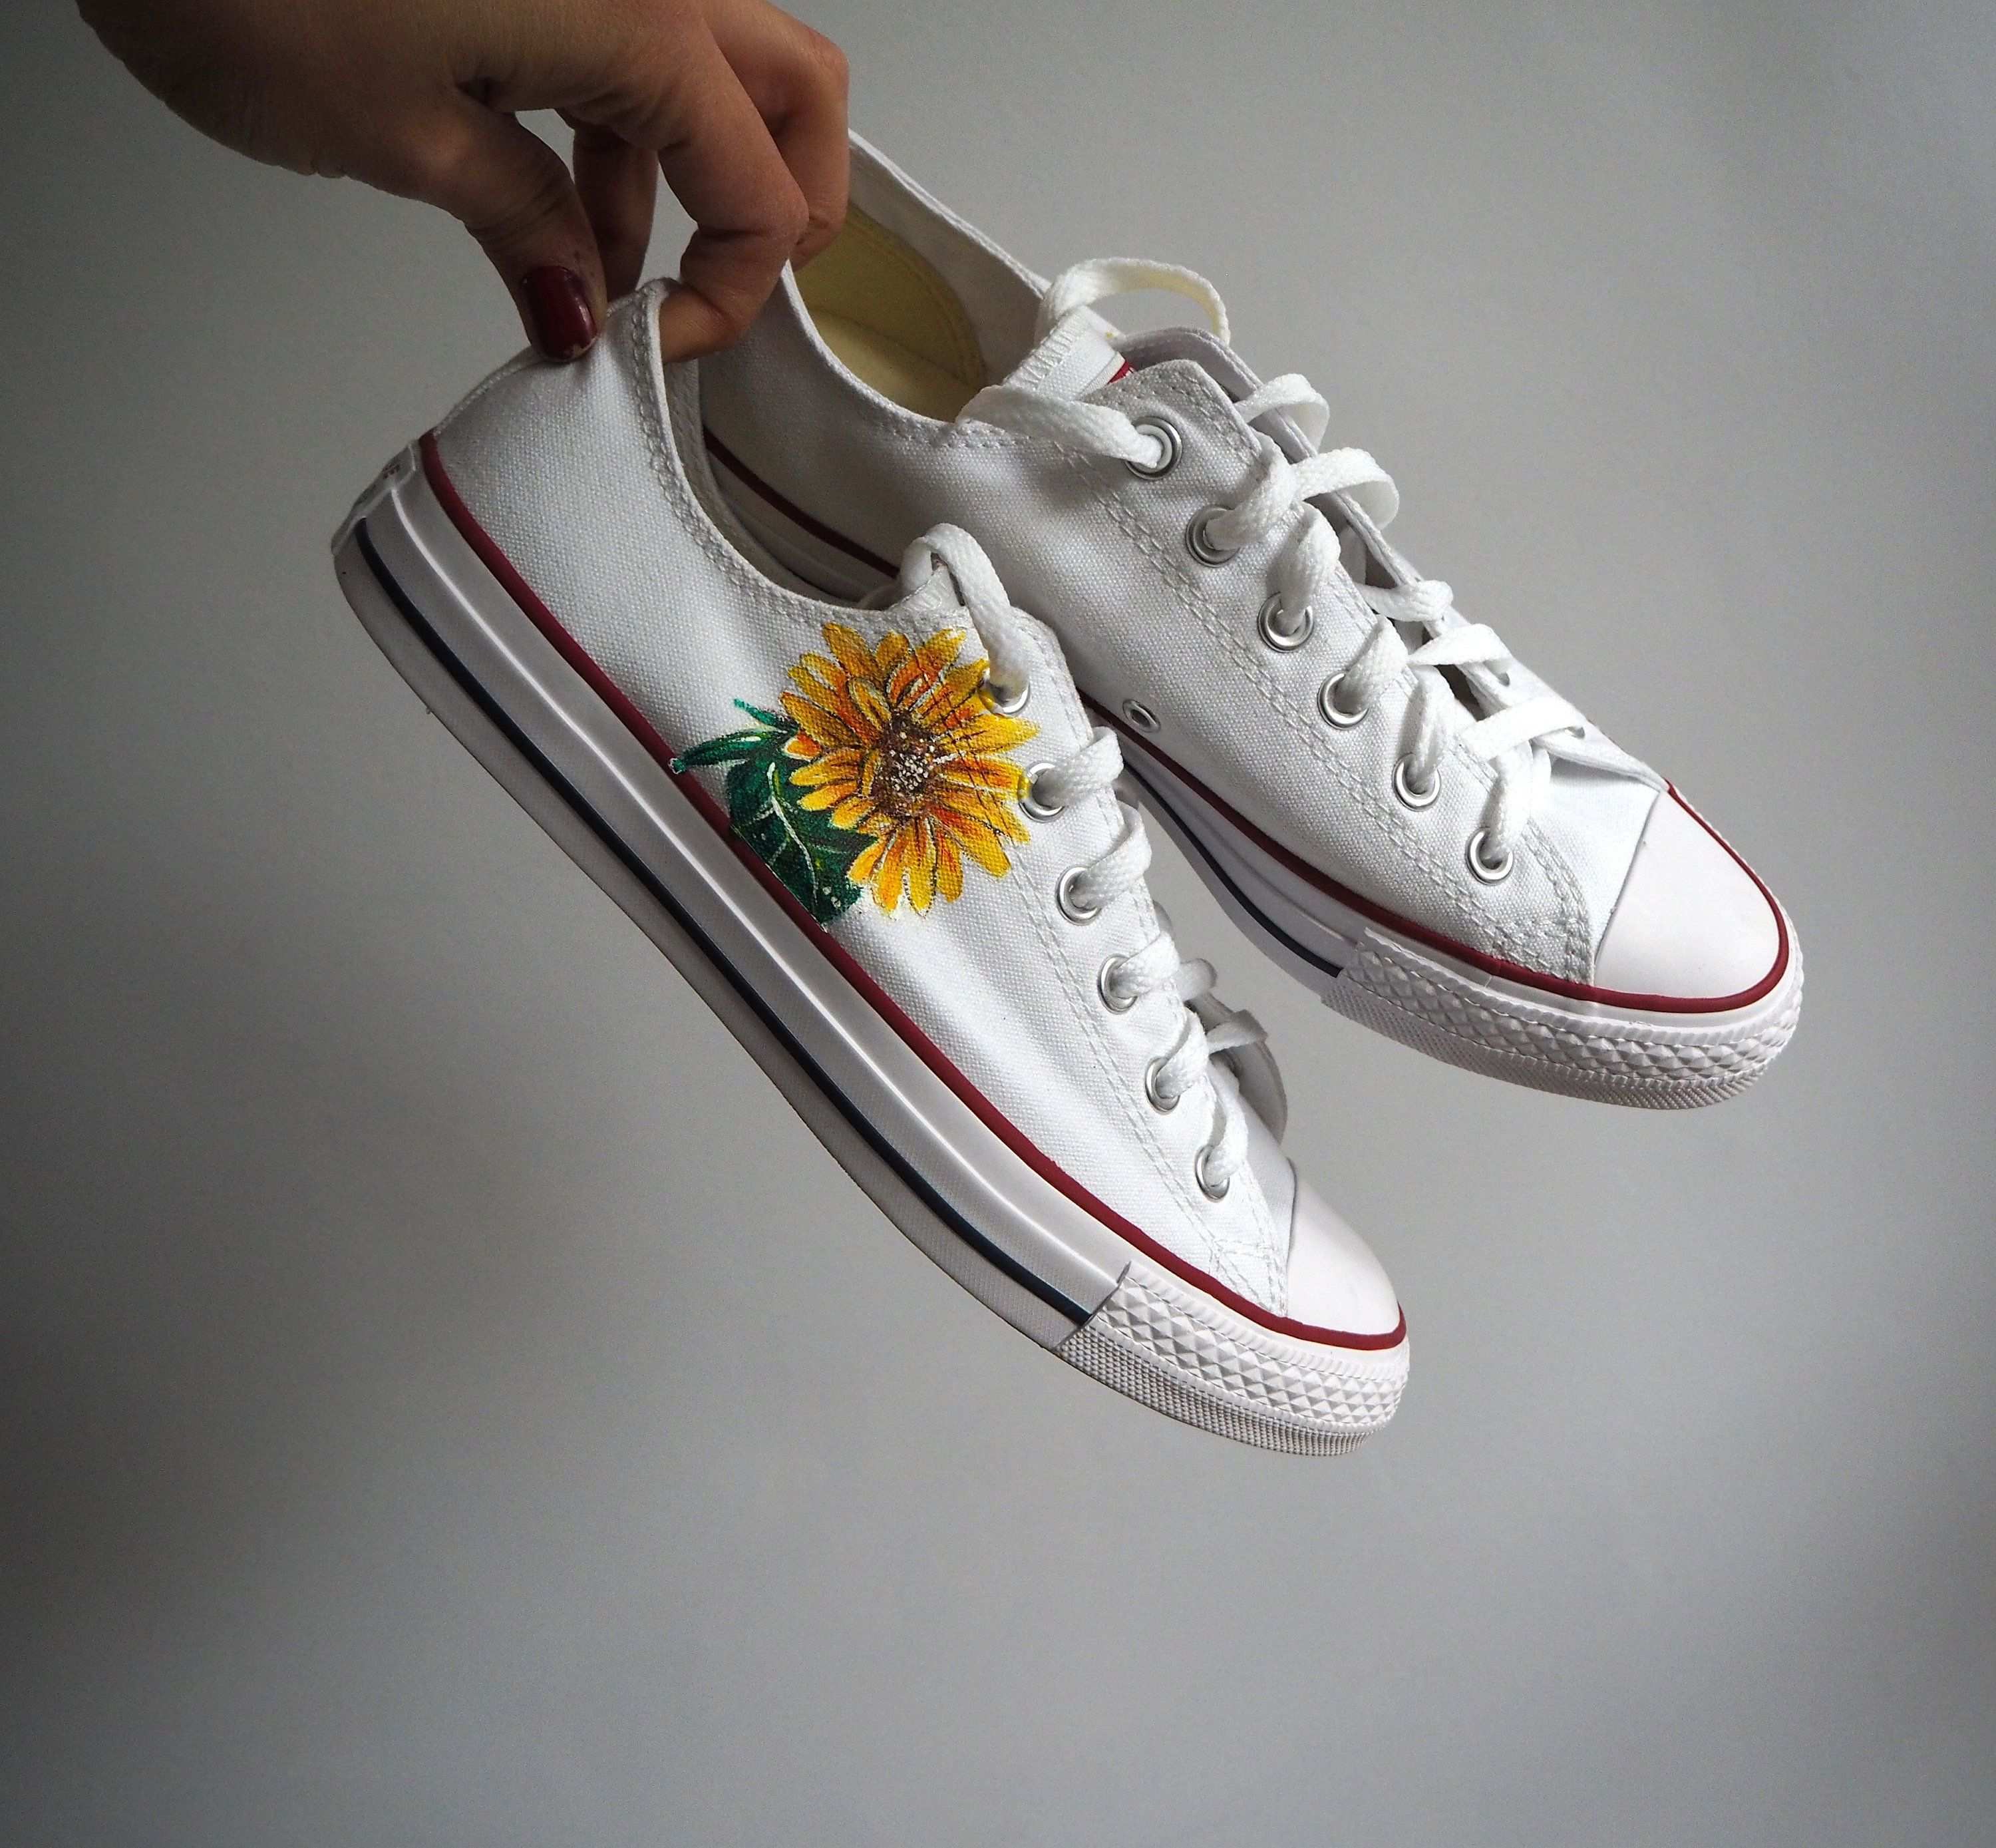 Custom Sunflower Shoes Handpainted Flower Converse Floral Etsy Floral Shoes Galaxy Shoes Diy Shoes